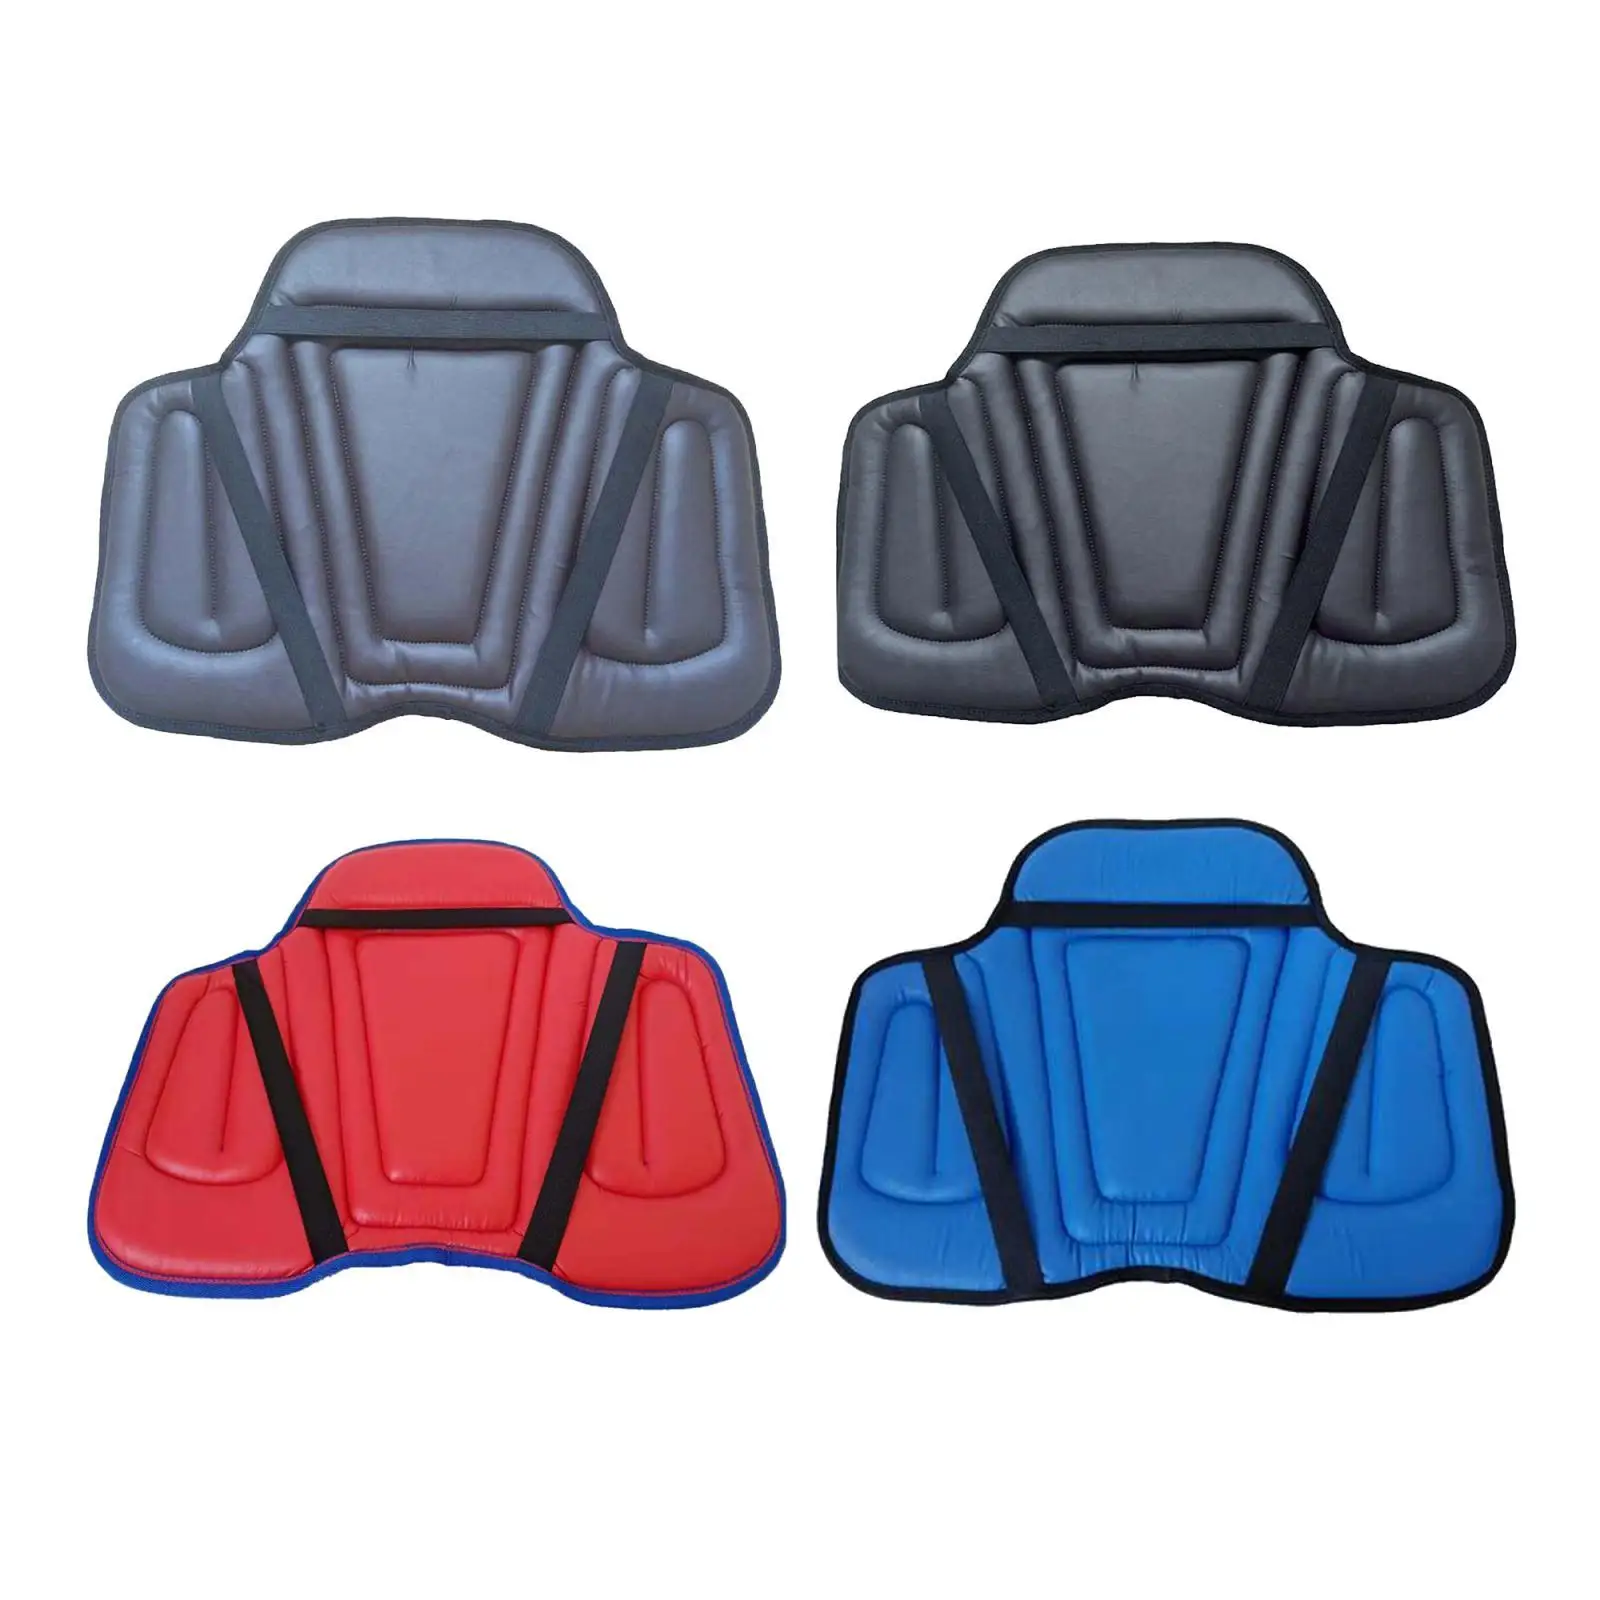 PU Riding Saddle Pad Shock Absorbing Memory Foam Saddle Outdoor Training Shockproof Harness Seat Cushion for Horse Equestrian